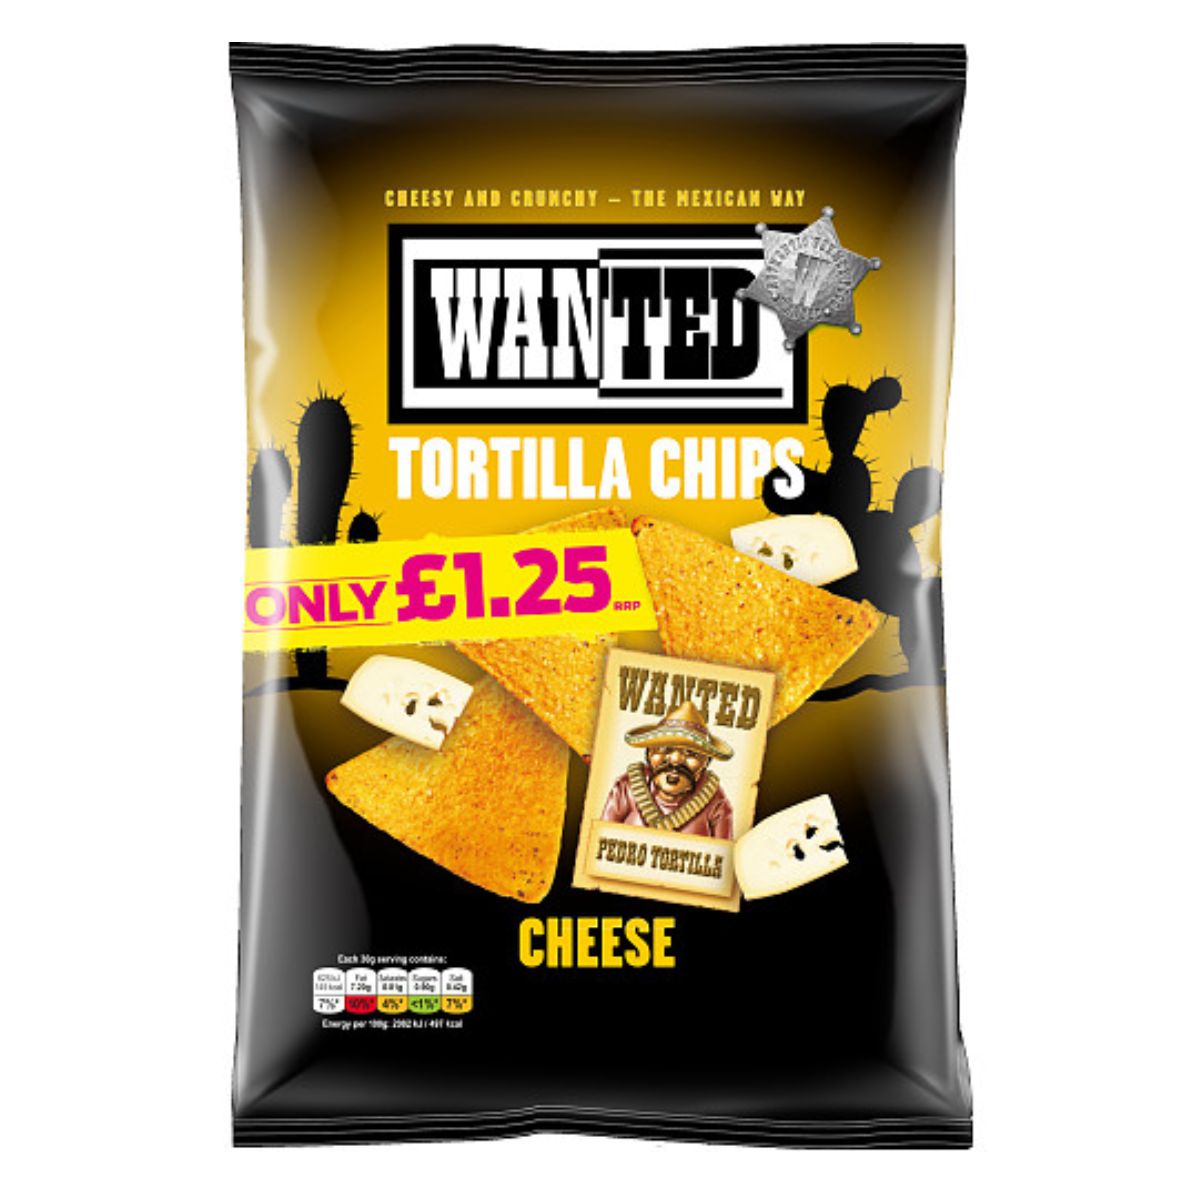 Wanted Tortilla Chips Cheese with 125g.